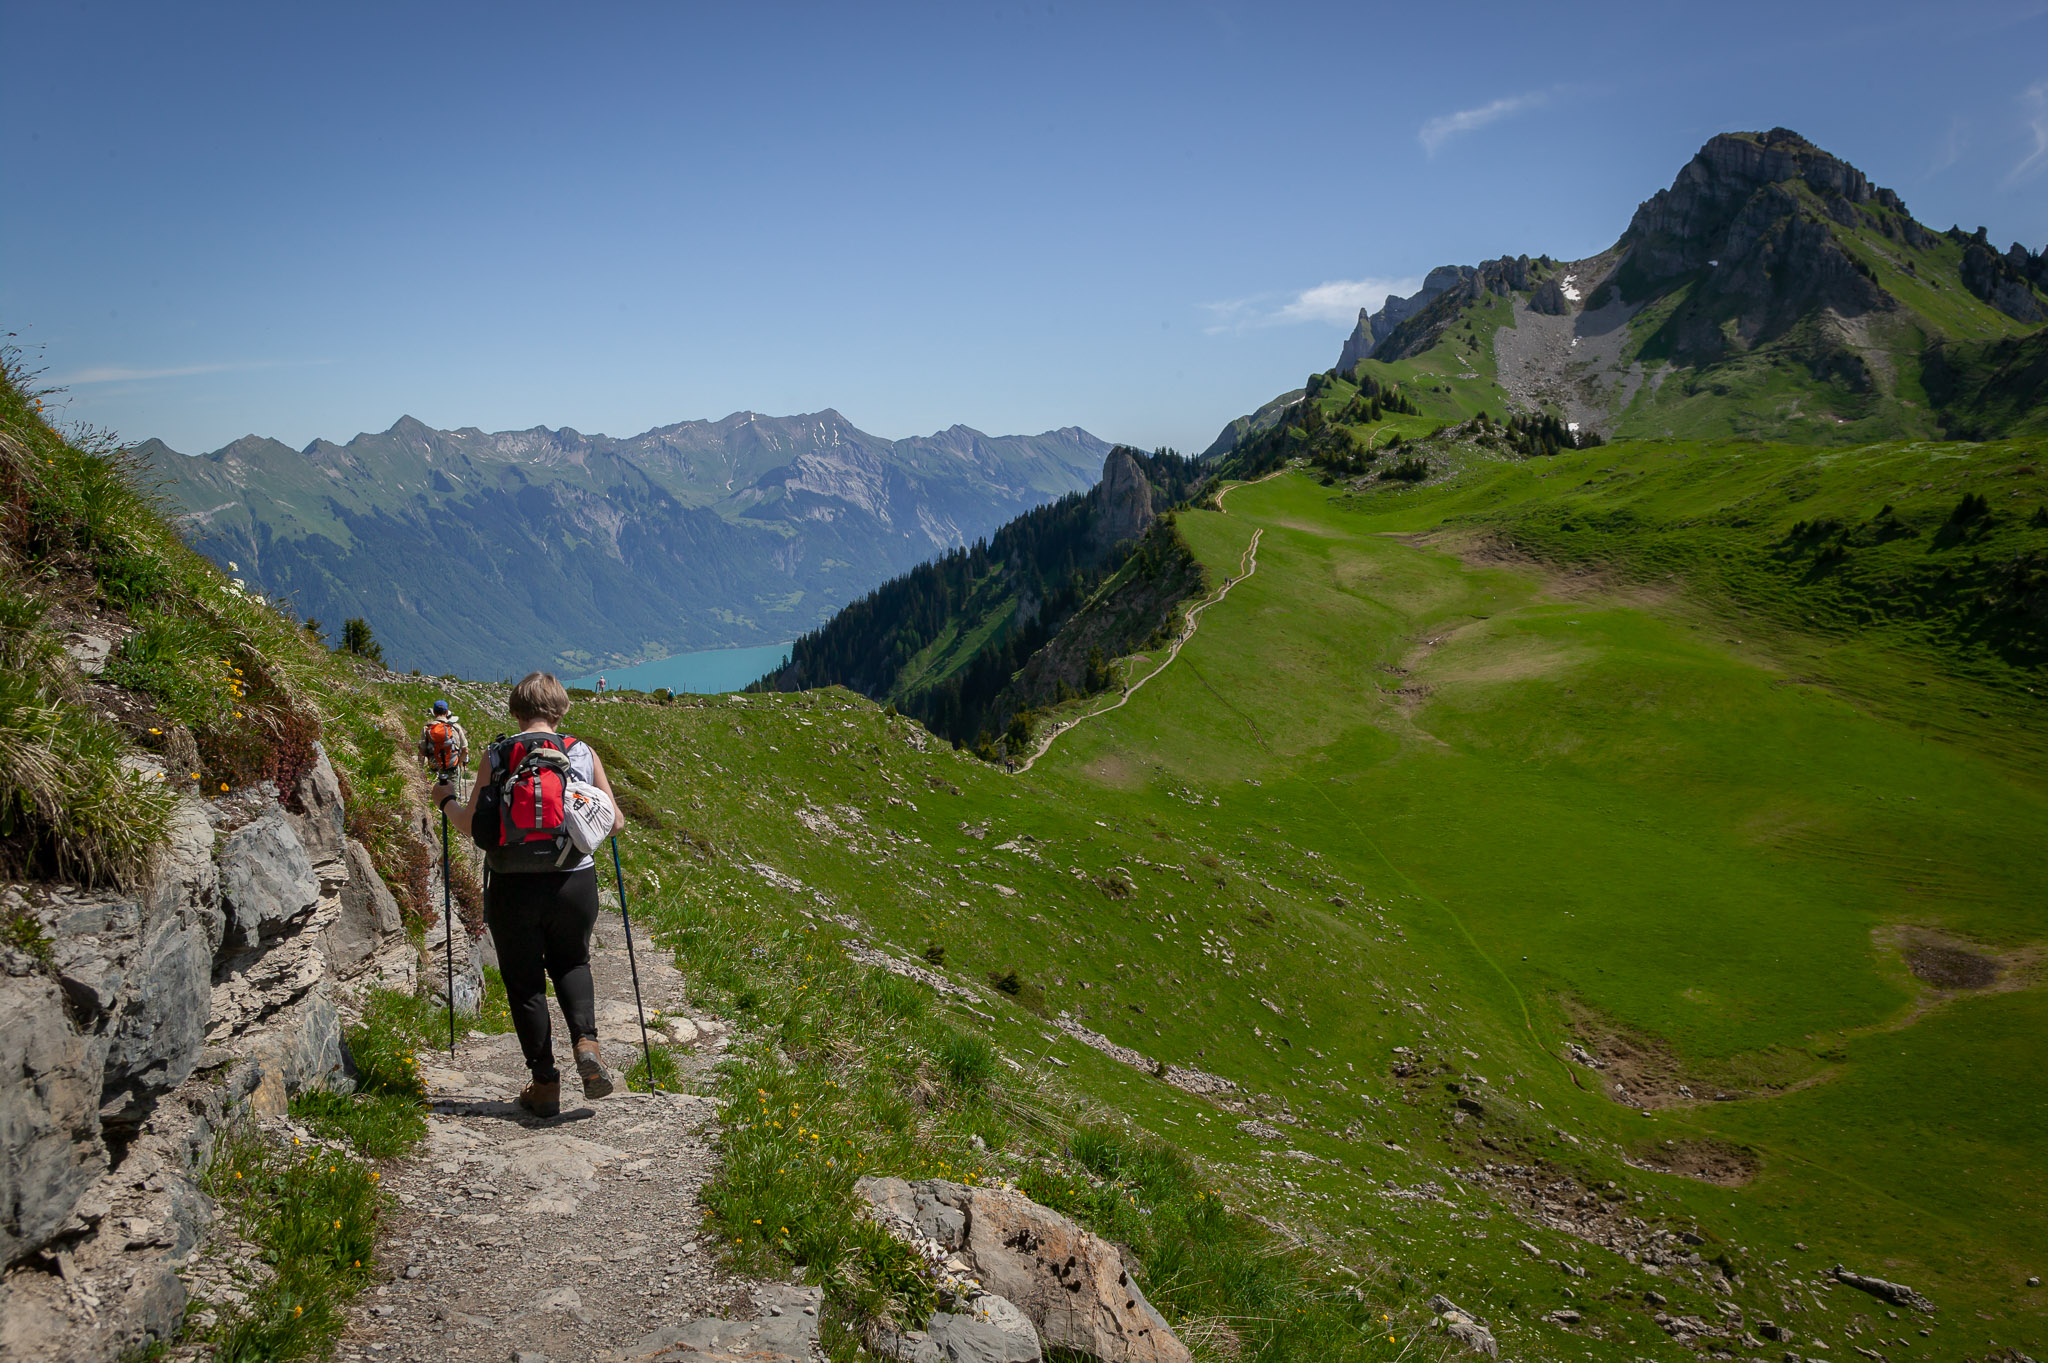 View along Schynige Platte-First-Grindelwald hike